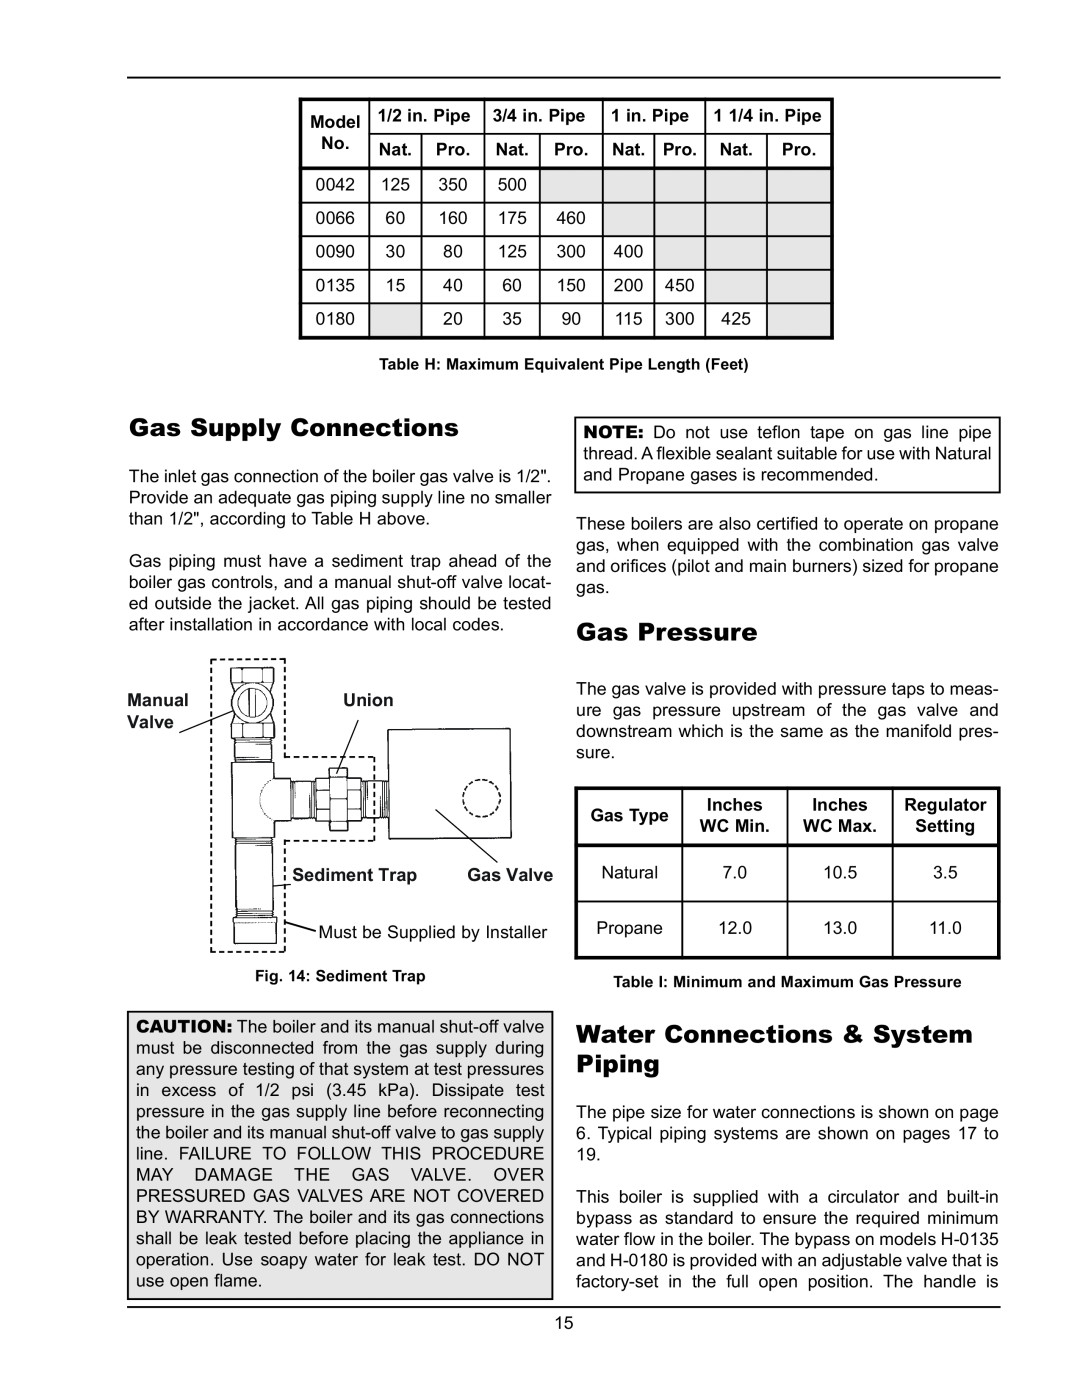 Raypak 0180B Type H Gas Supply Connections, Gas Pressure, Water Connections & System Piping, ManualUnion Valve, Model 